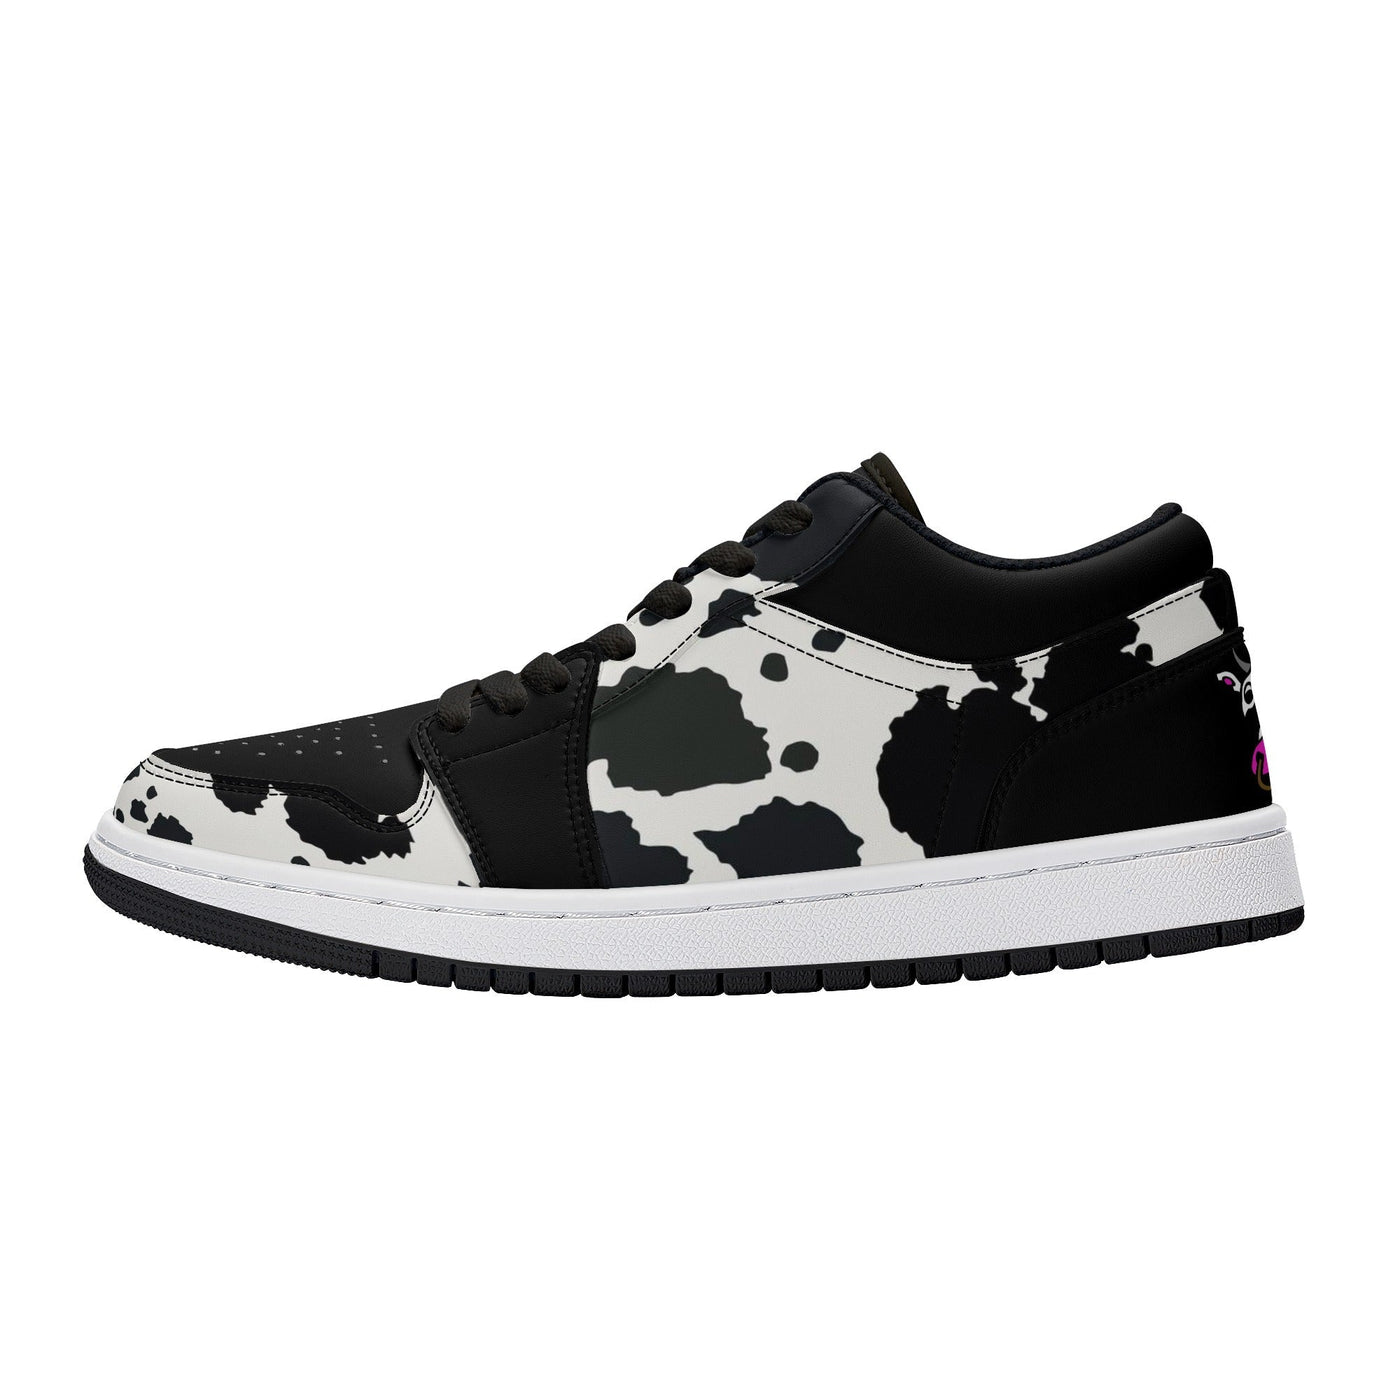 Moo-licious Cow print Low Tops Skateboard Sneakers